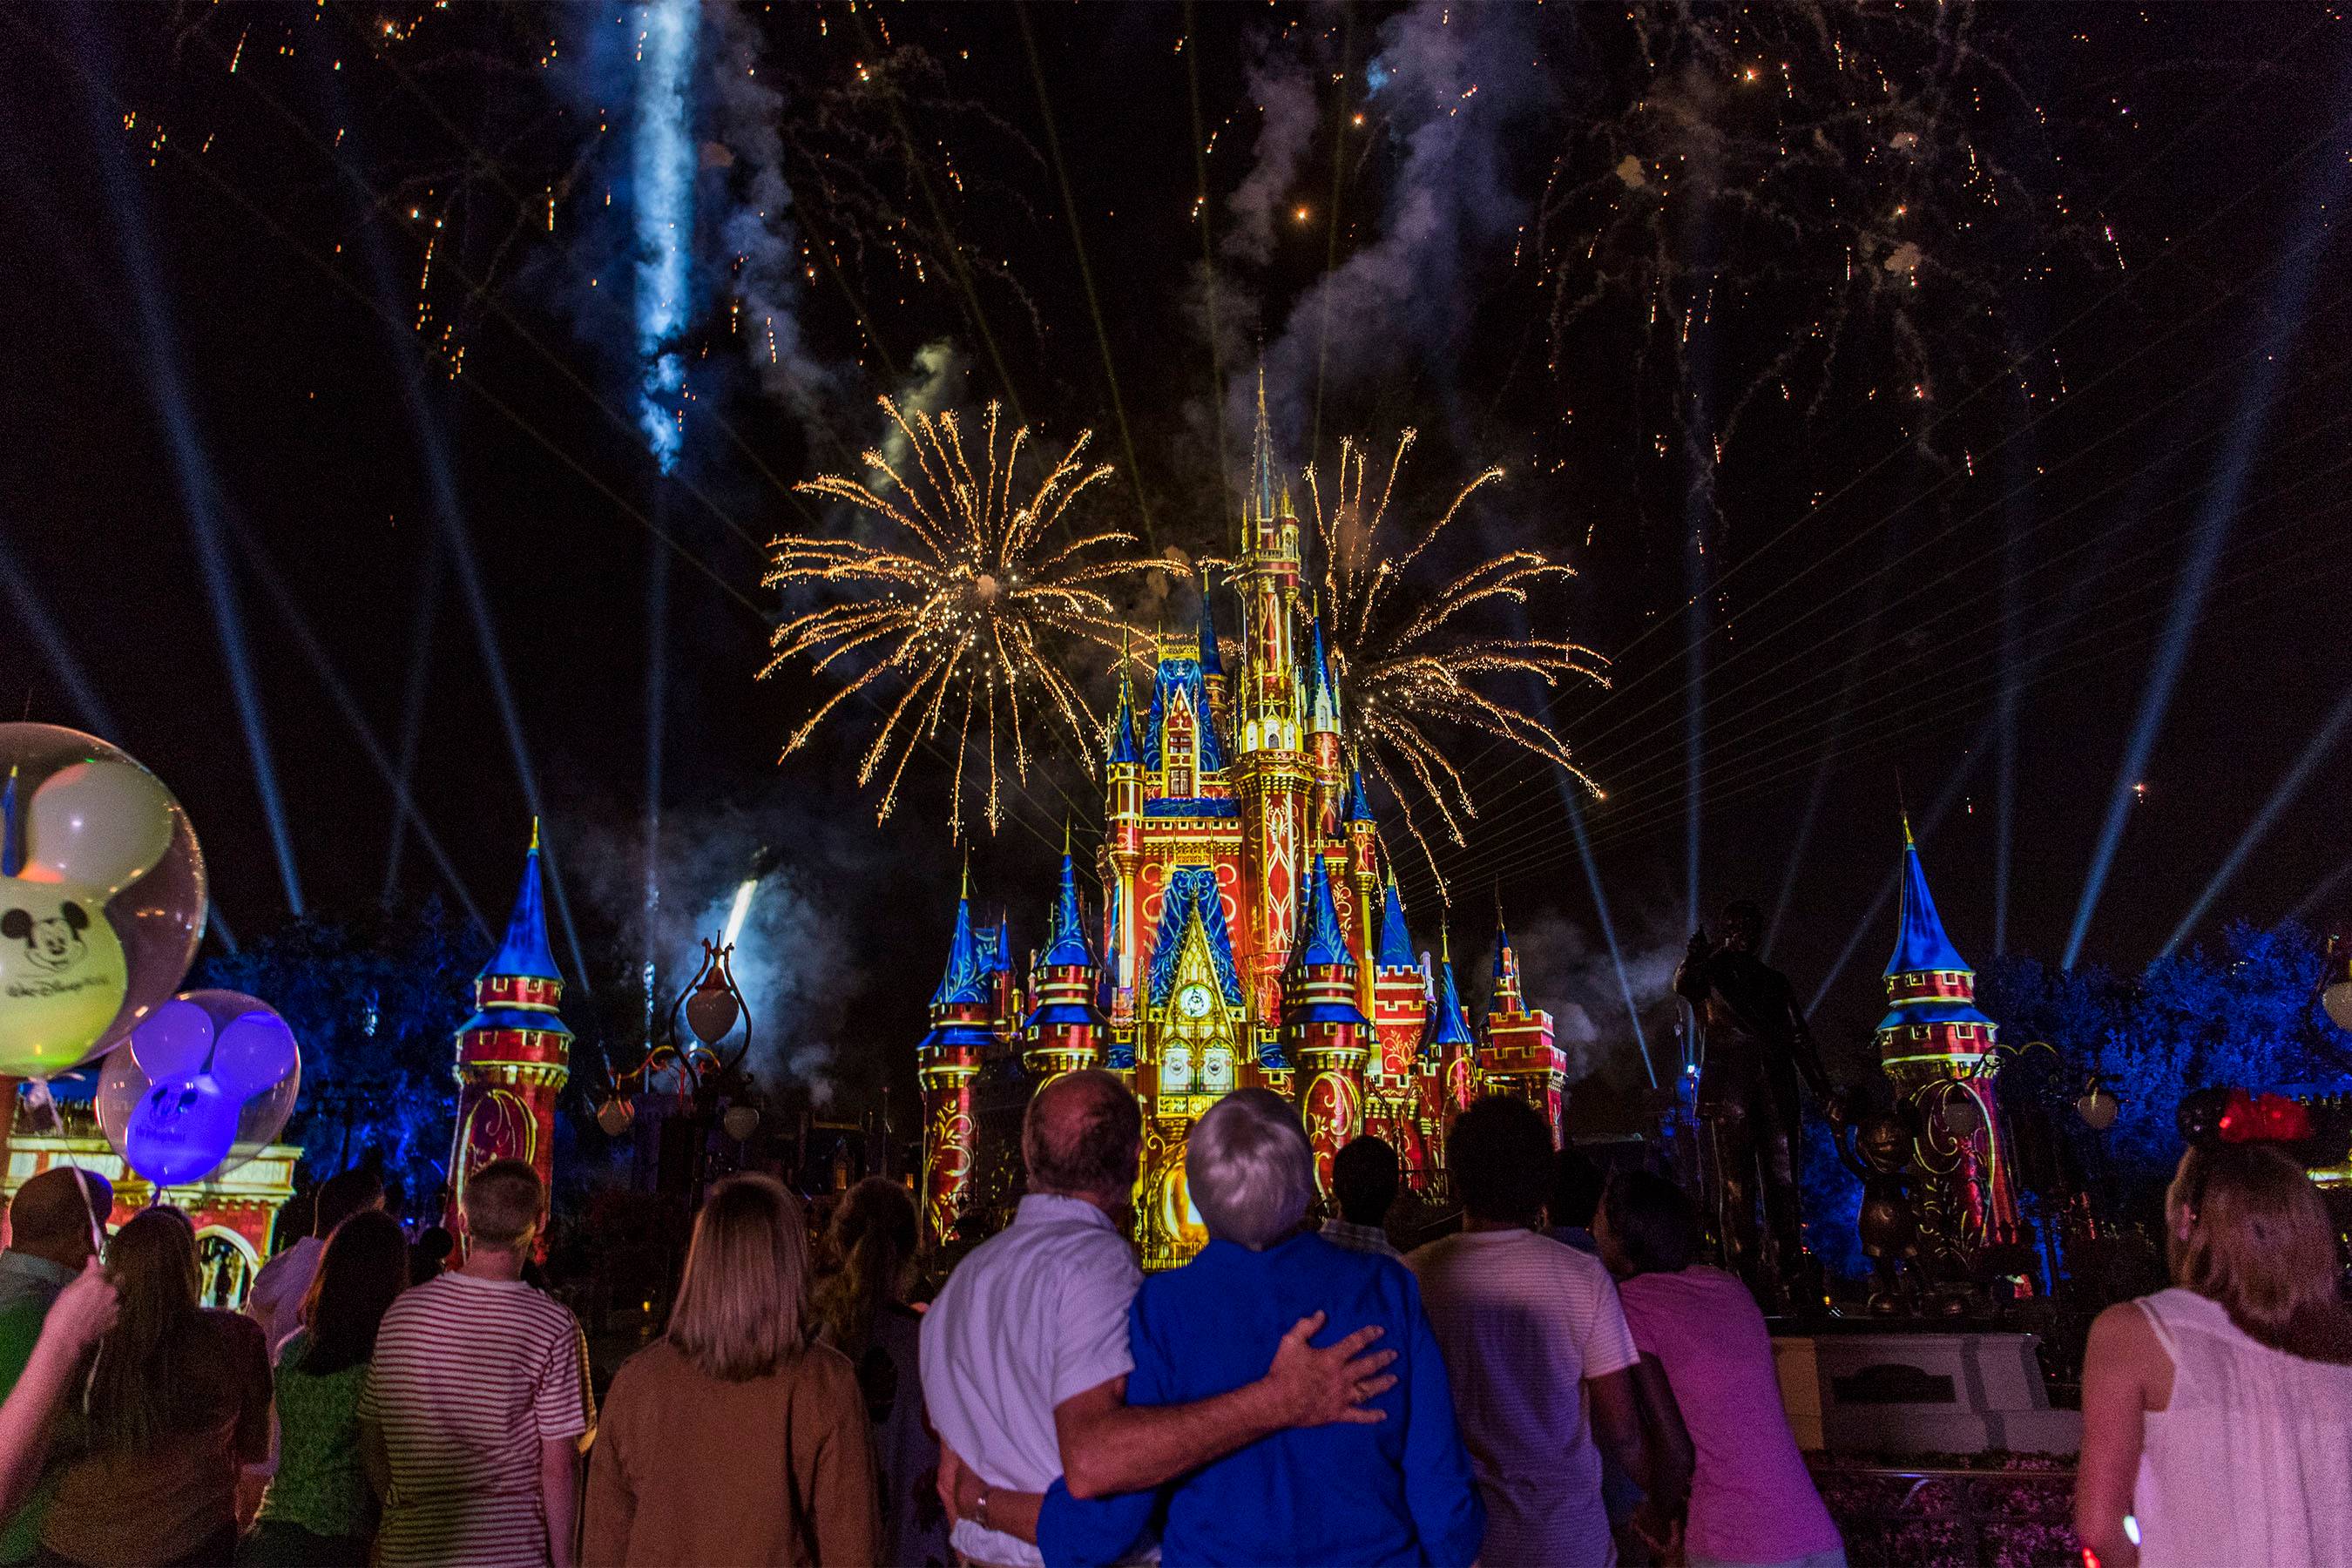 'Happily Ever After' to perform without fireworks tonight at Magic Kingdom